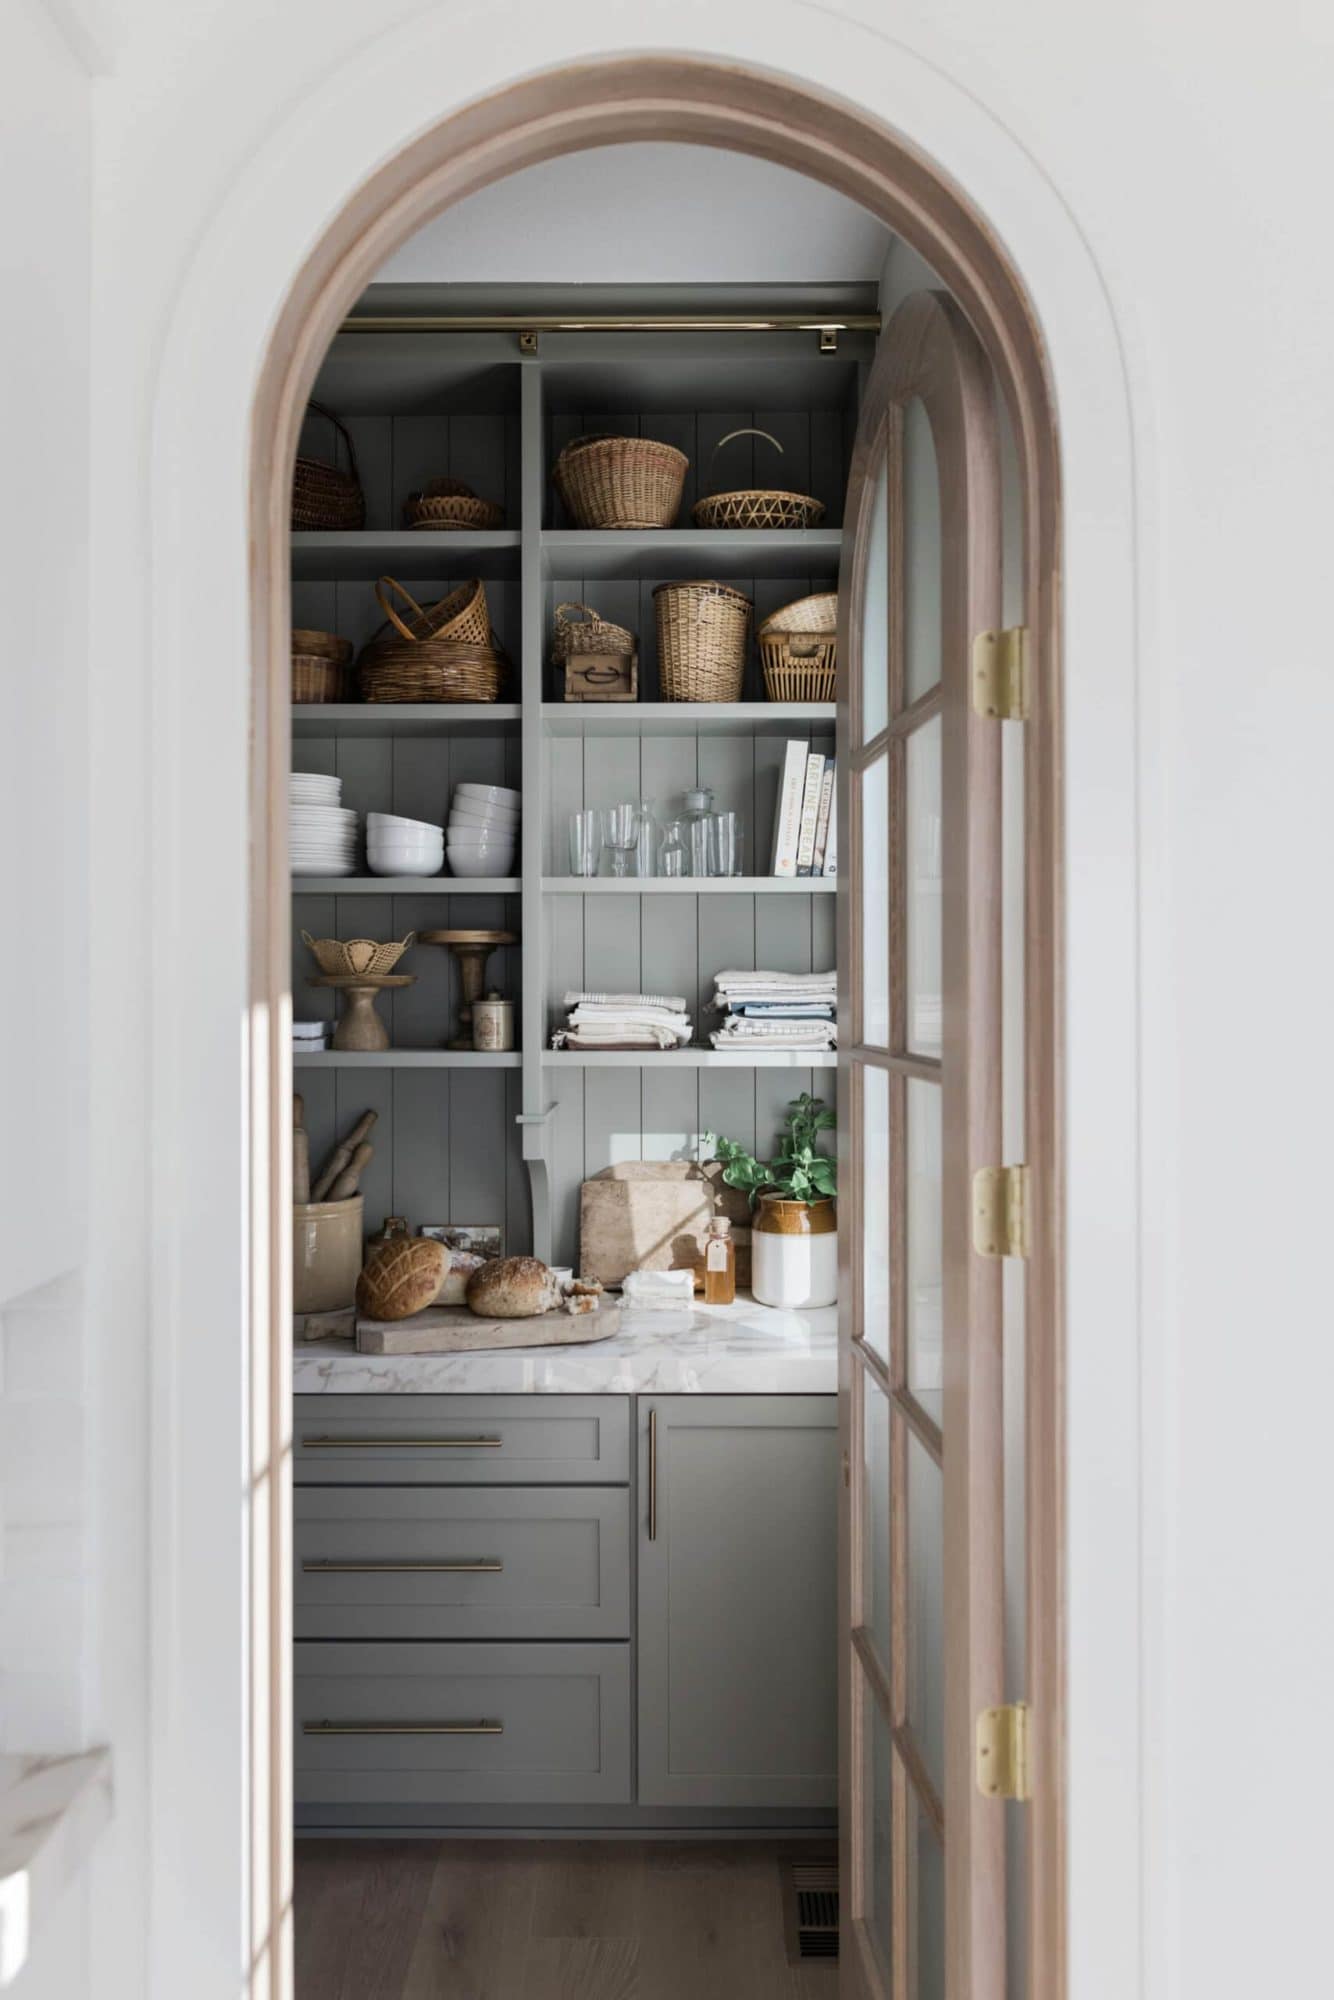 A BUTLER'S PANTRY WITH OPEN SHELVING